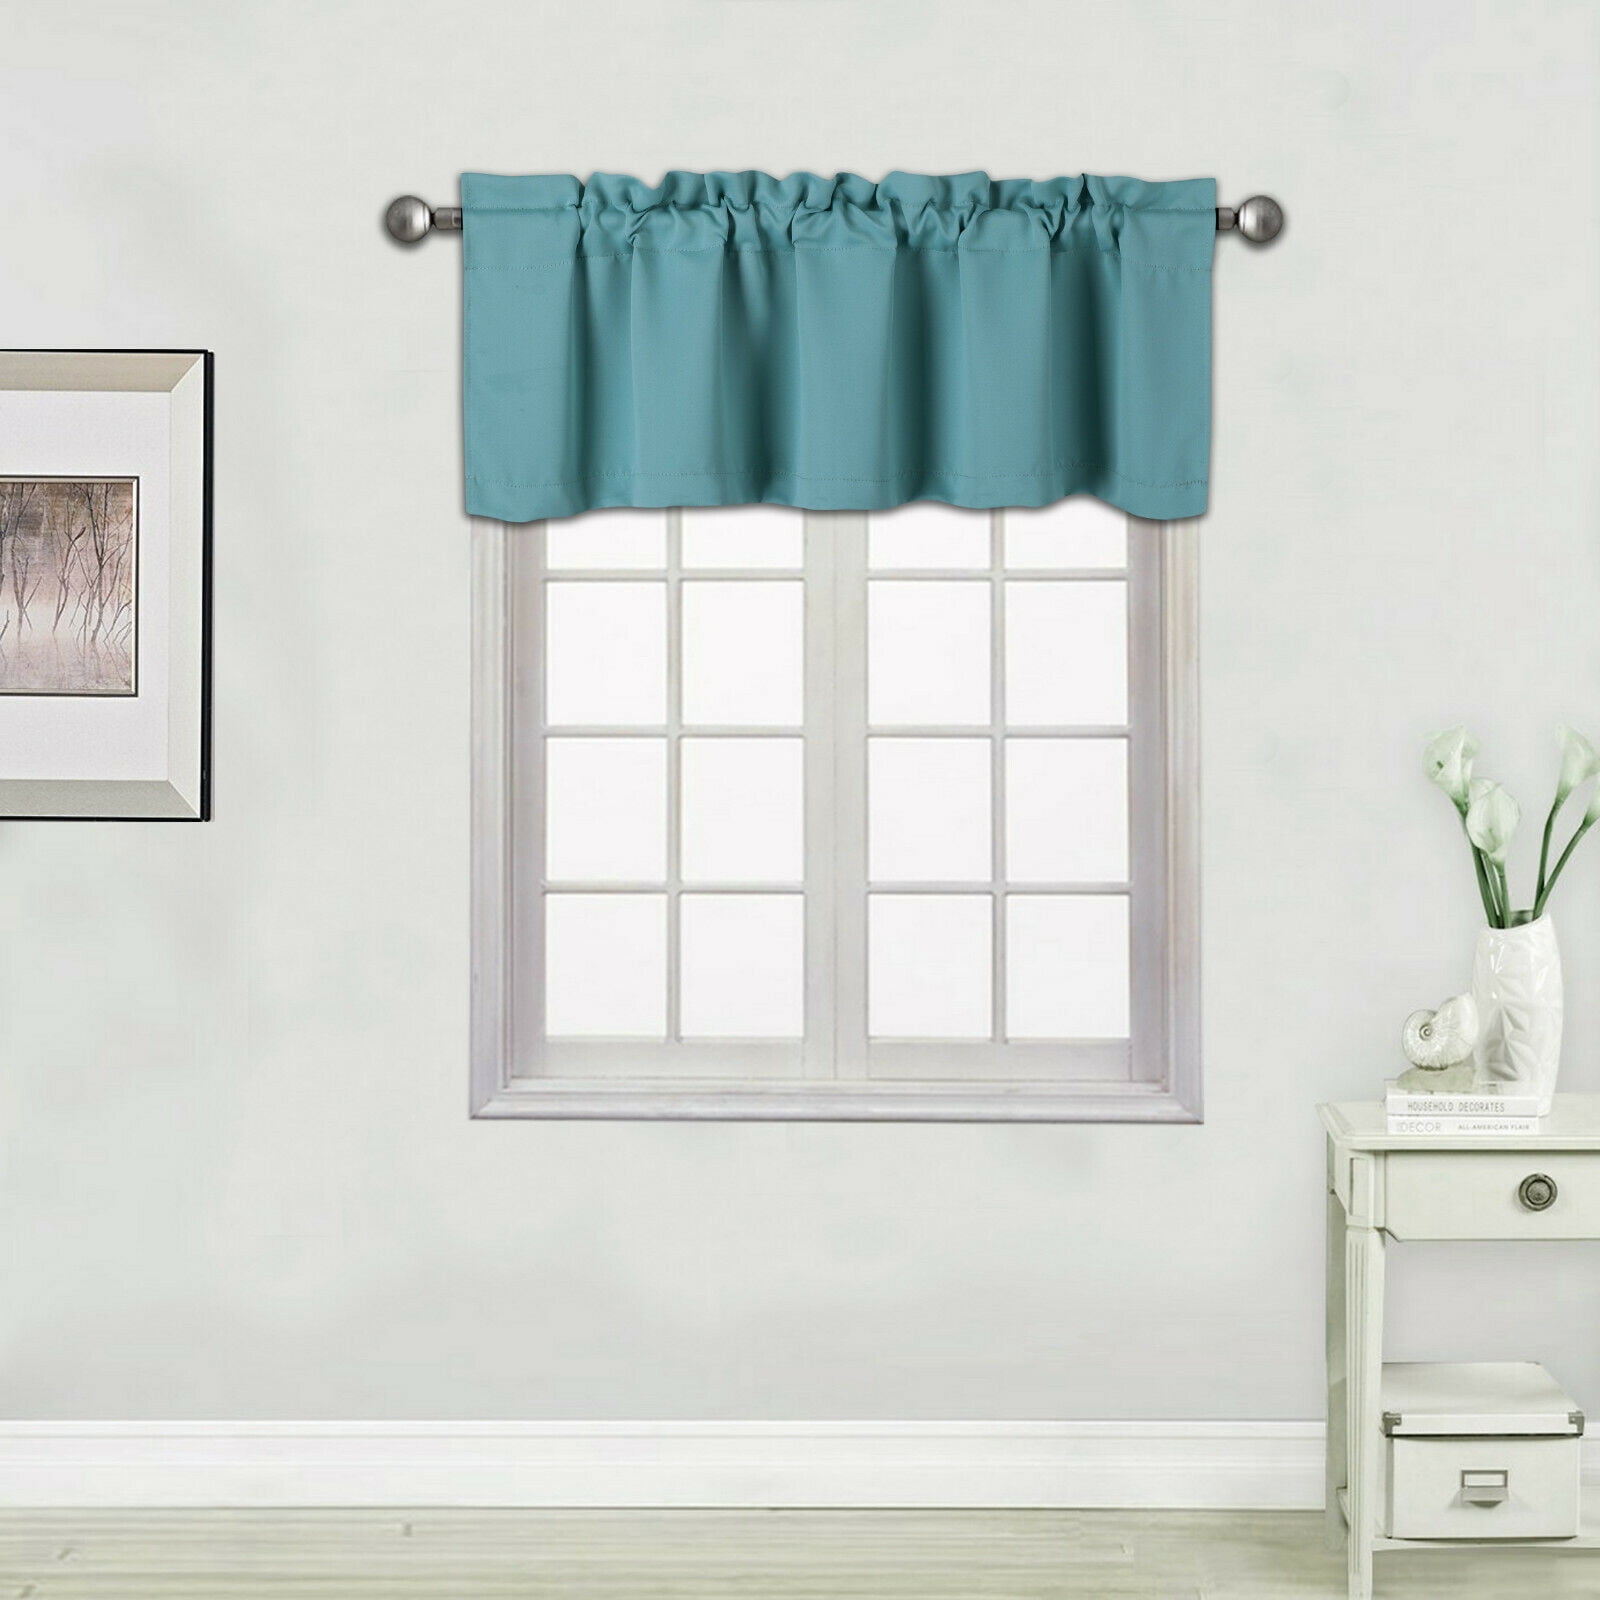 SMALL KITCHEN VALANCE ROD POCKET CURTAIN PANELS THERMAL INSULATED ...